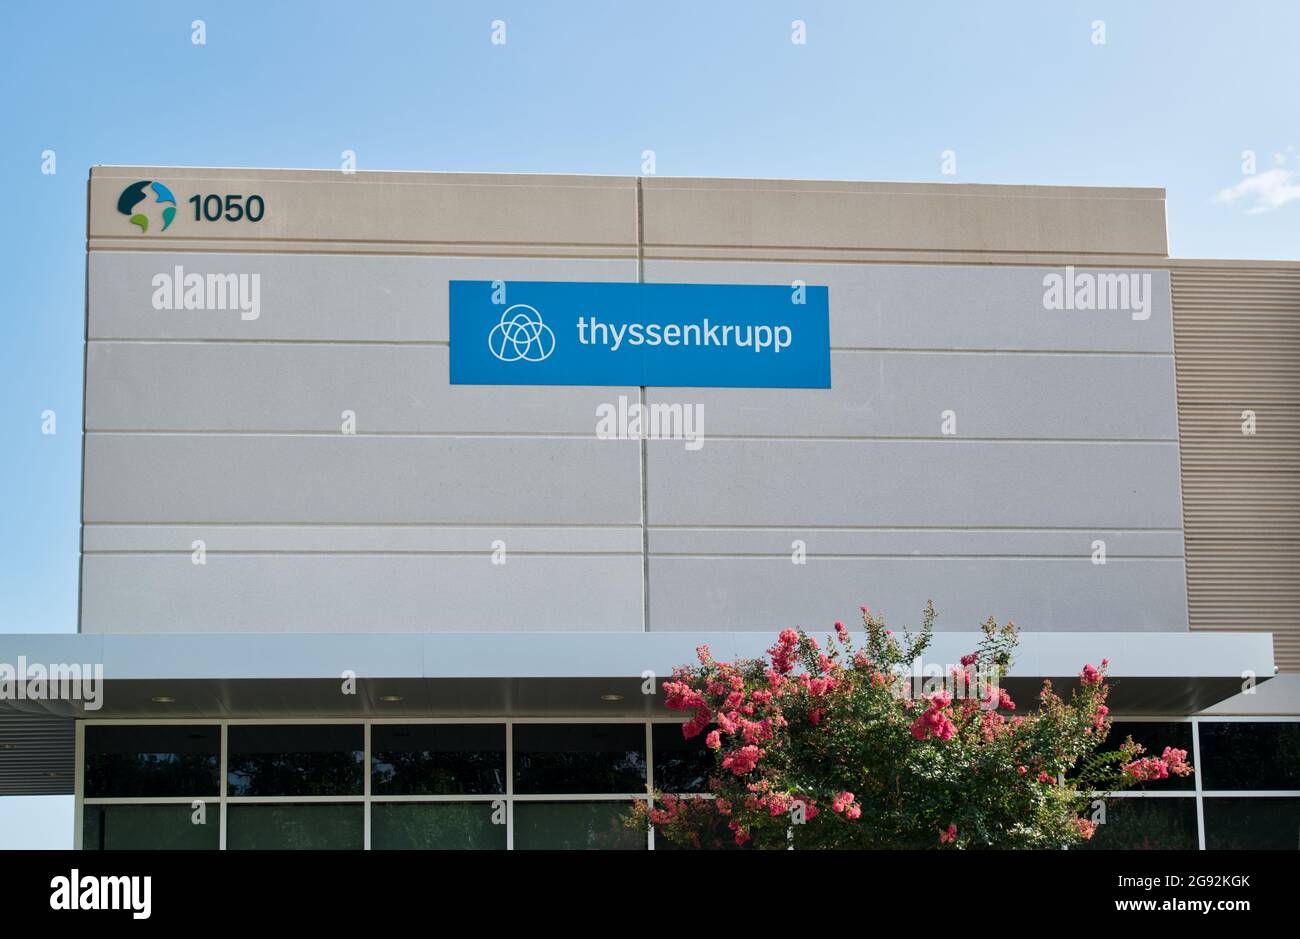 Houston, Texas USA 07-05-2021: ThyssenKrupp office building exterior in Houston, TX. German industrial engineering and steel production company. Stock Photo